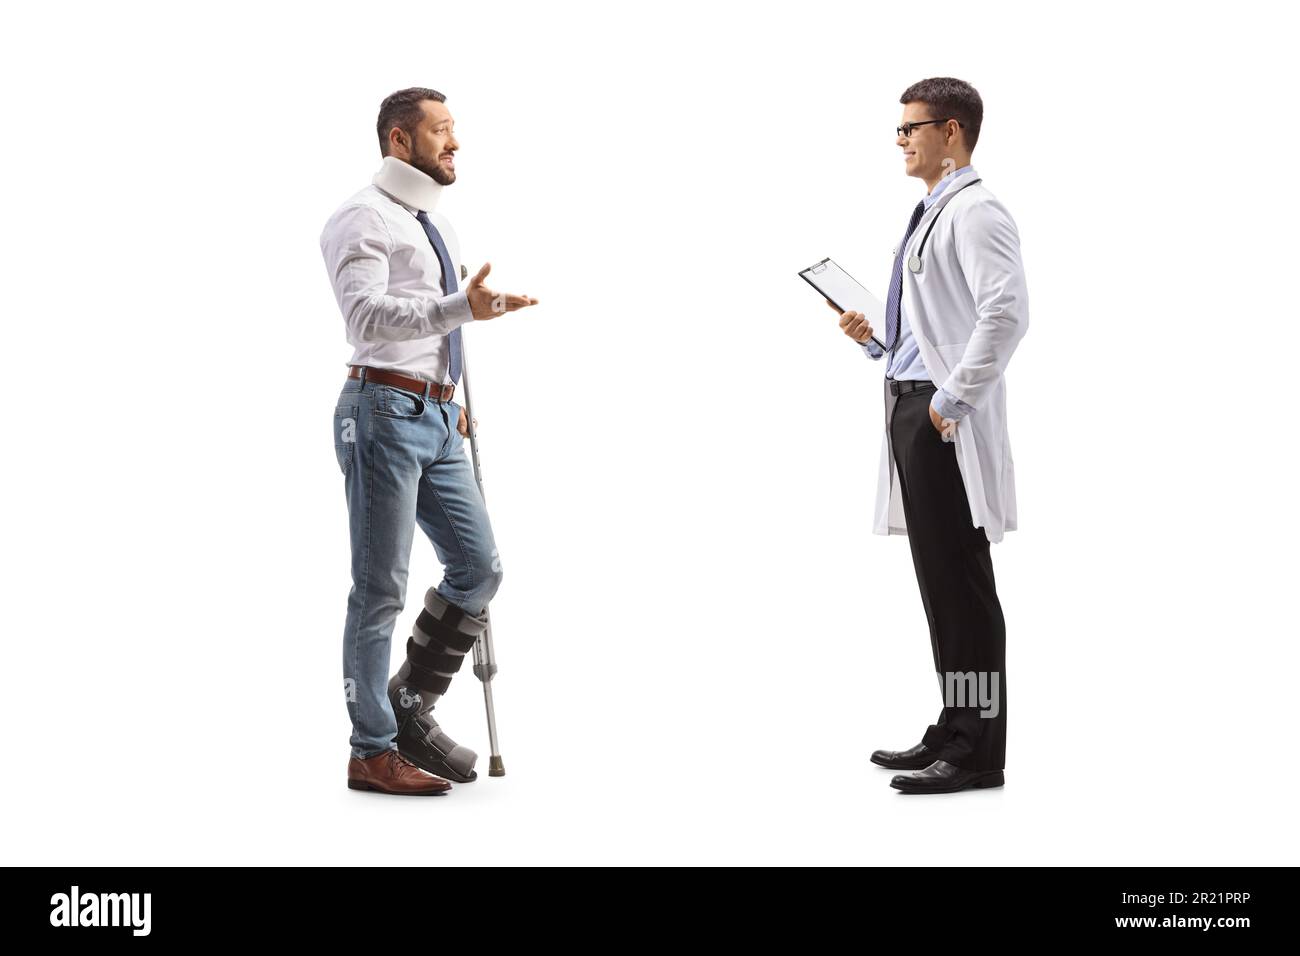 Injured male patient with an orthopedic boot and cervical collar talking to a male physician isolated on white background Stock Photo